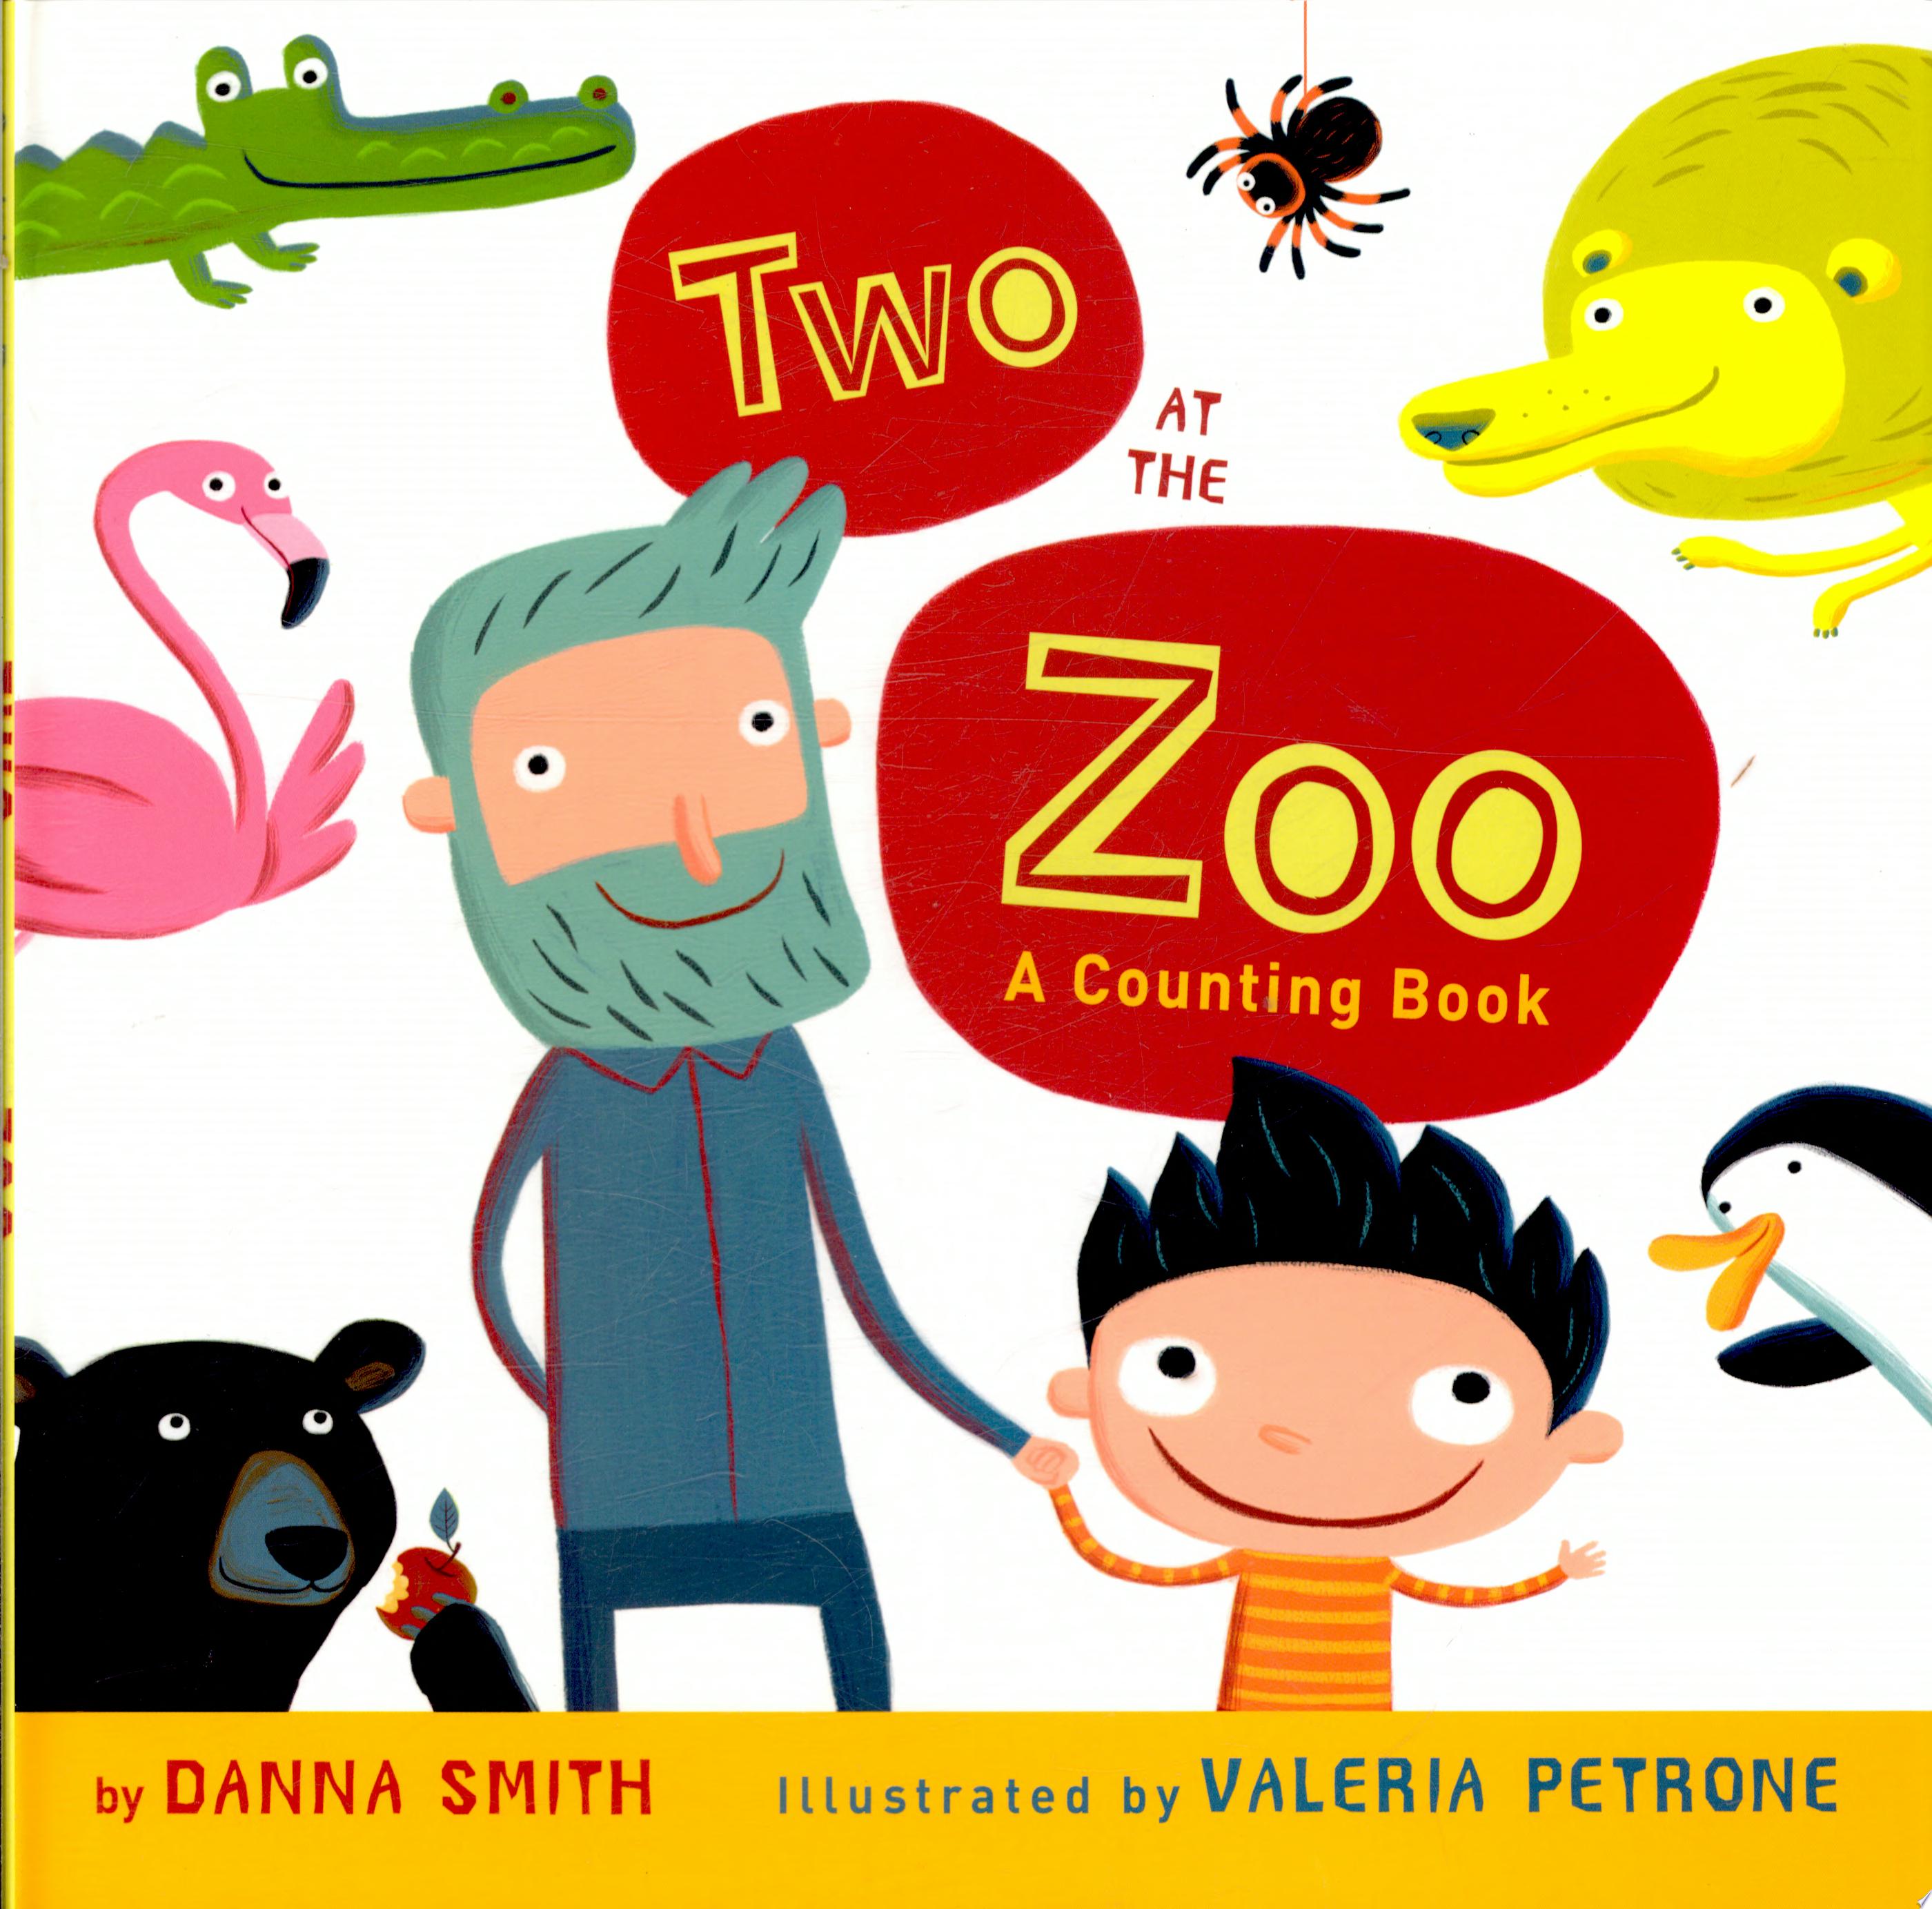 Image for "Two at the Zoo"